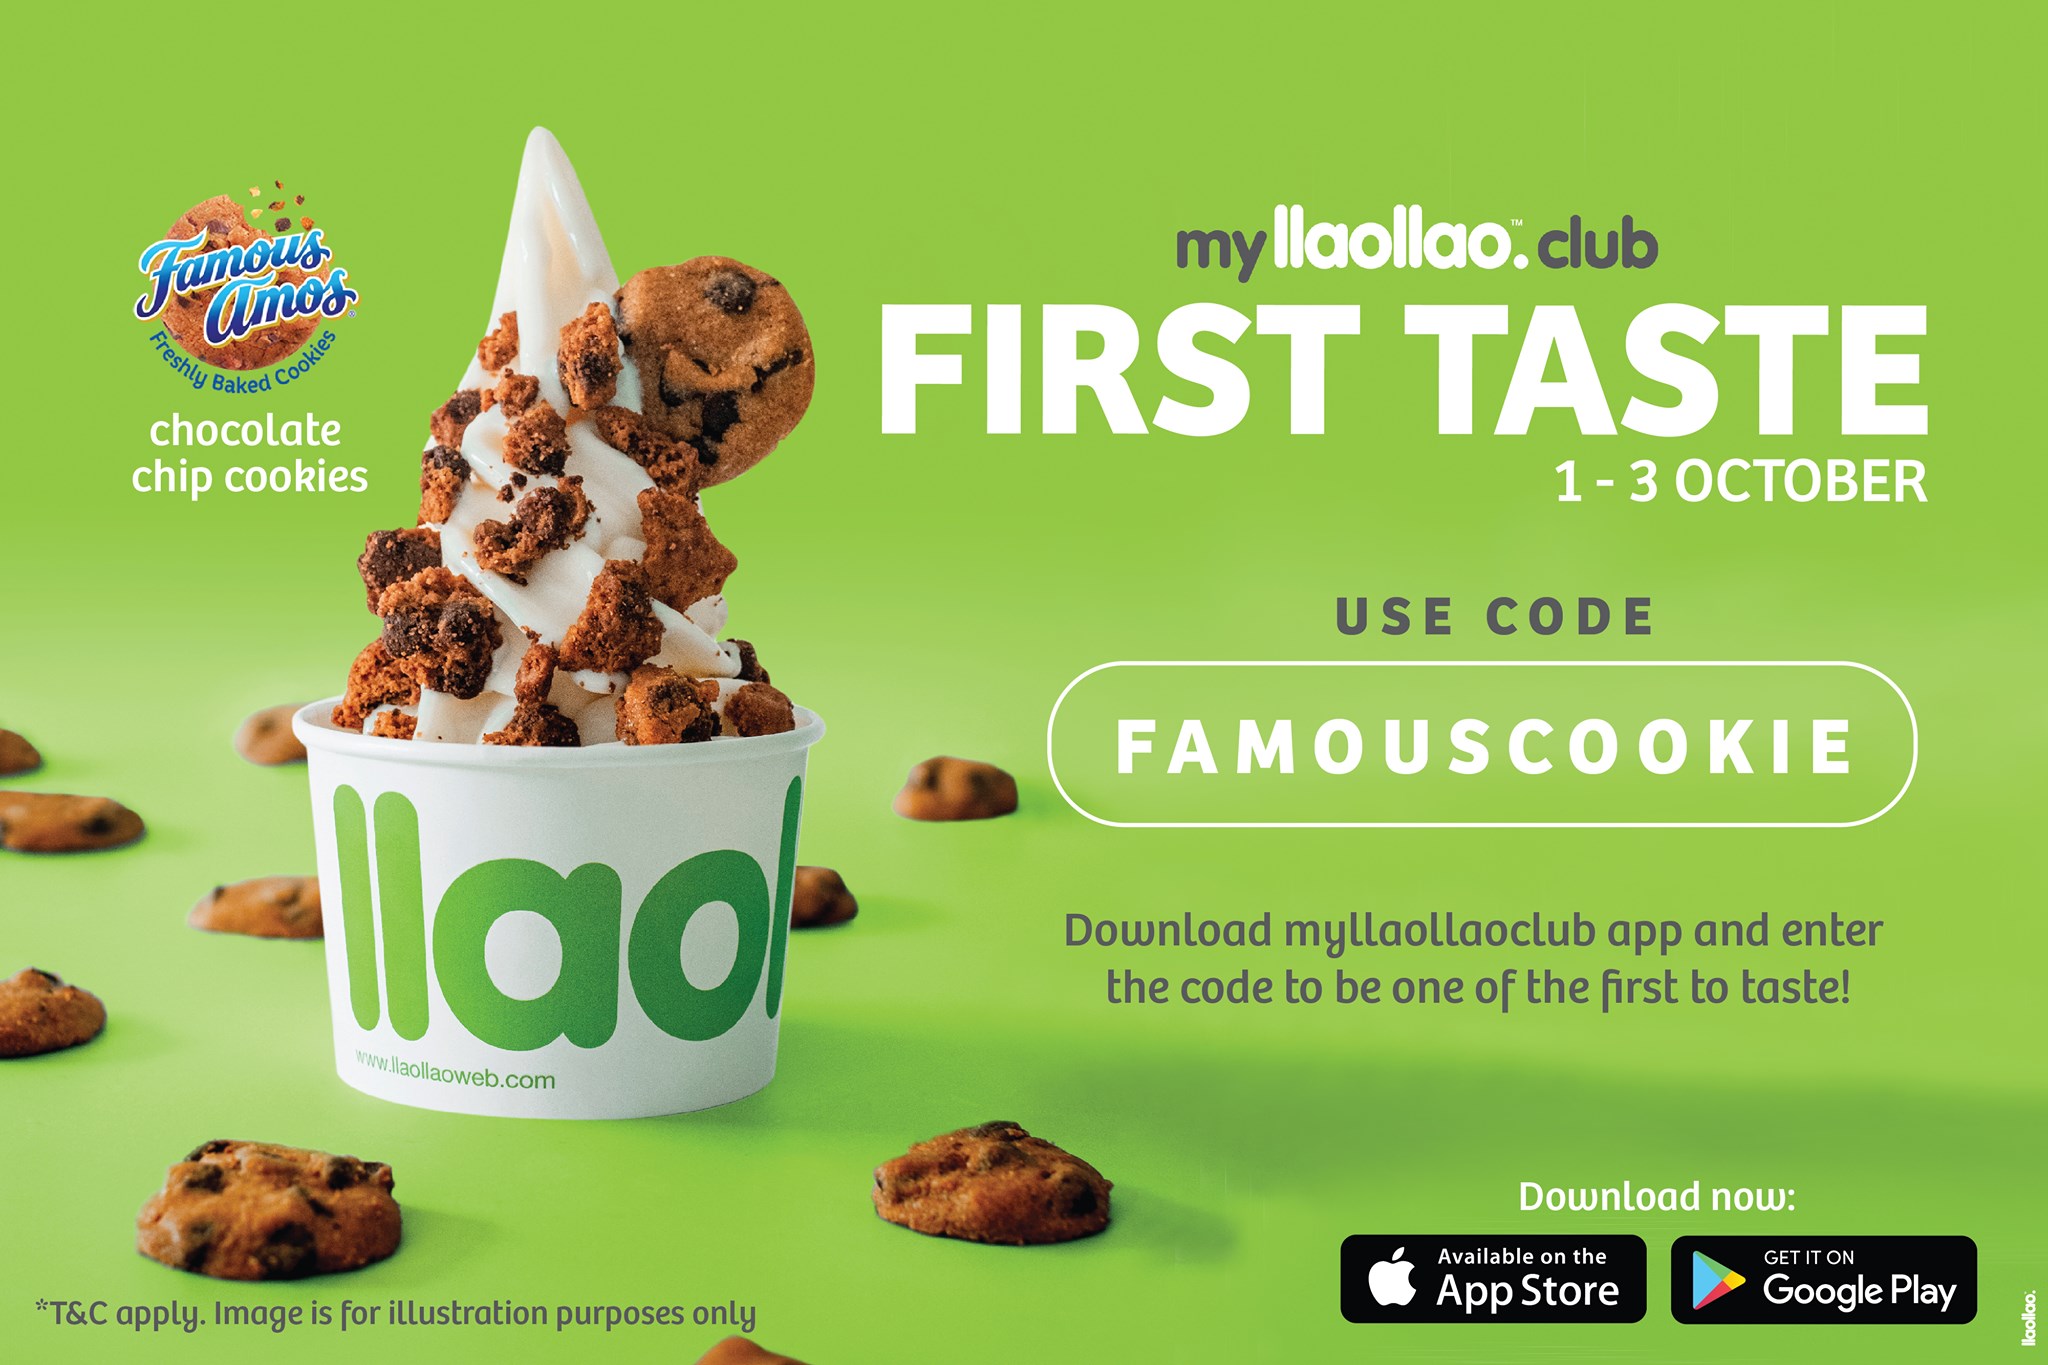 myllaollao Club Exclusive First Taste with Famous Amos